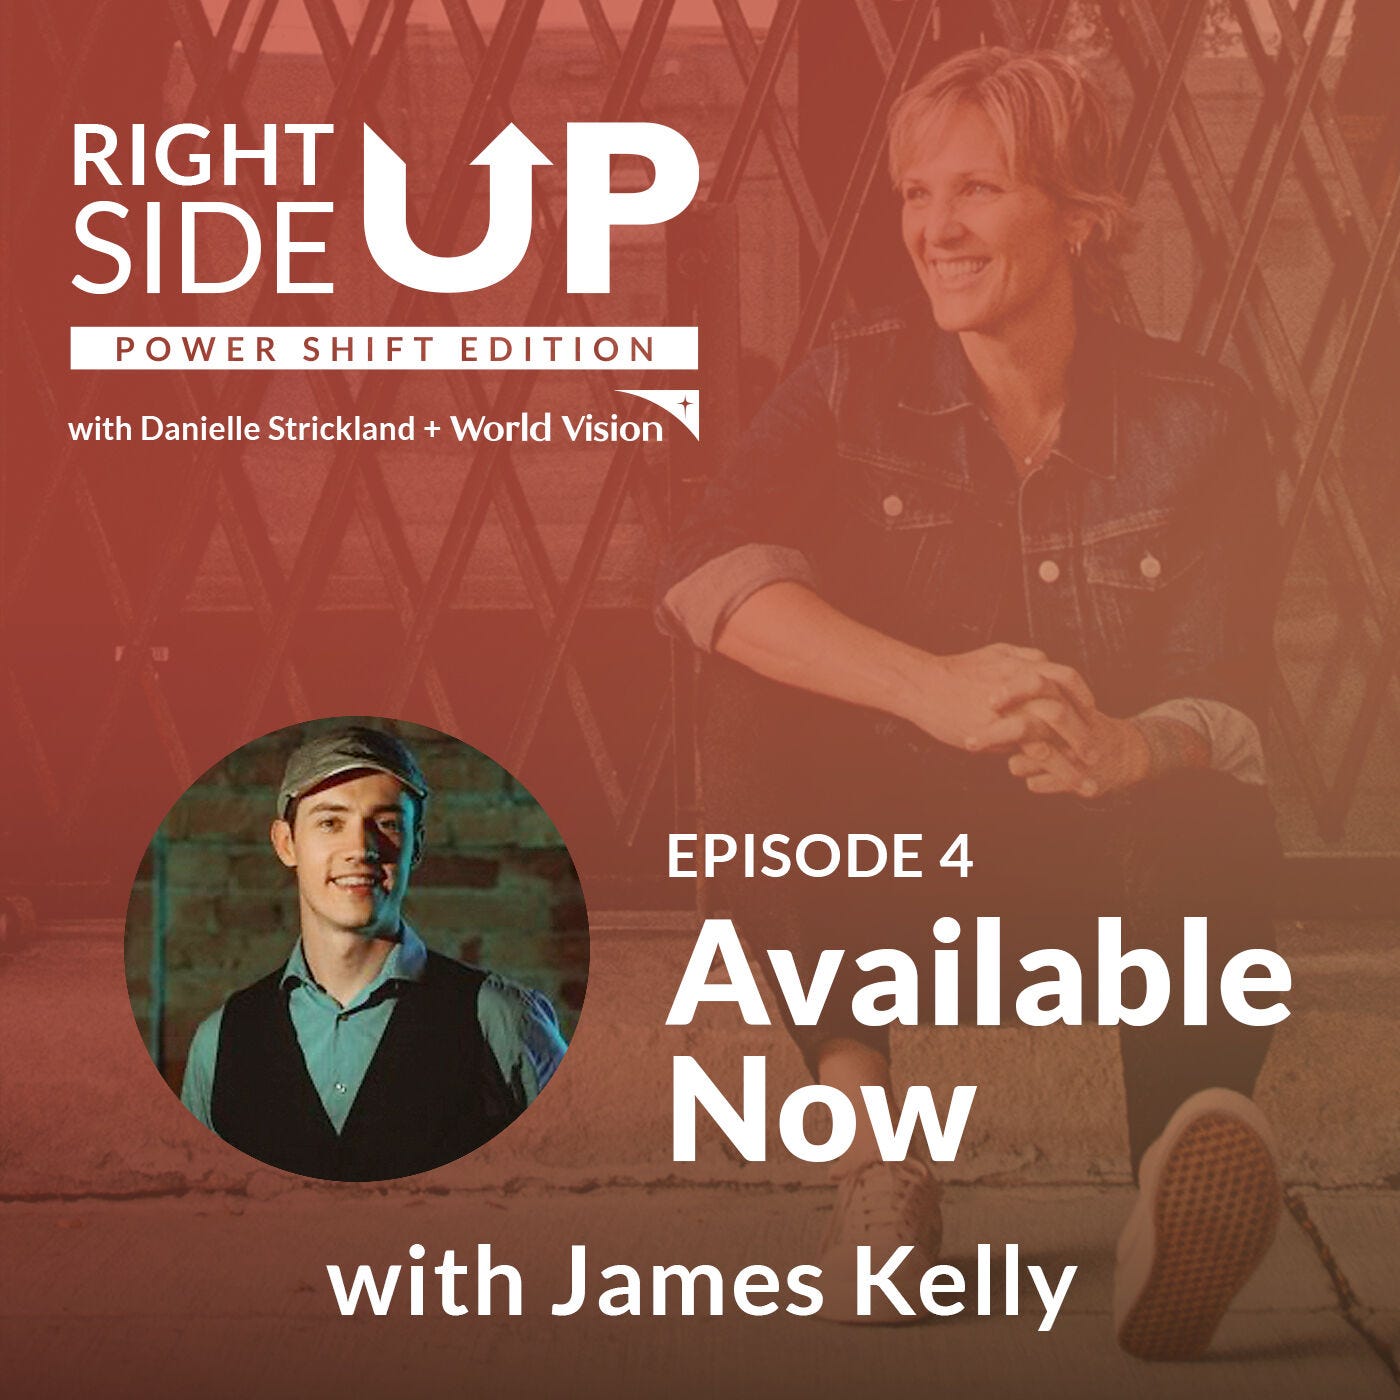 Power Shift Edition: Interview with James Kelly